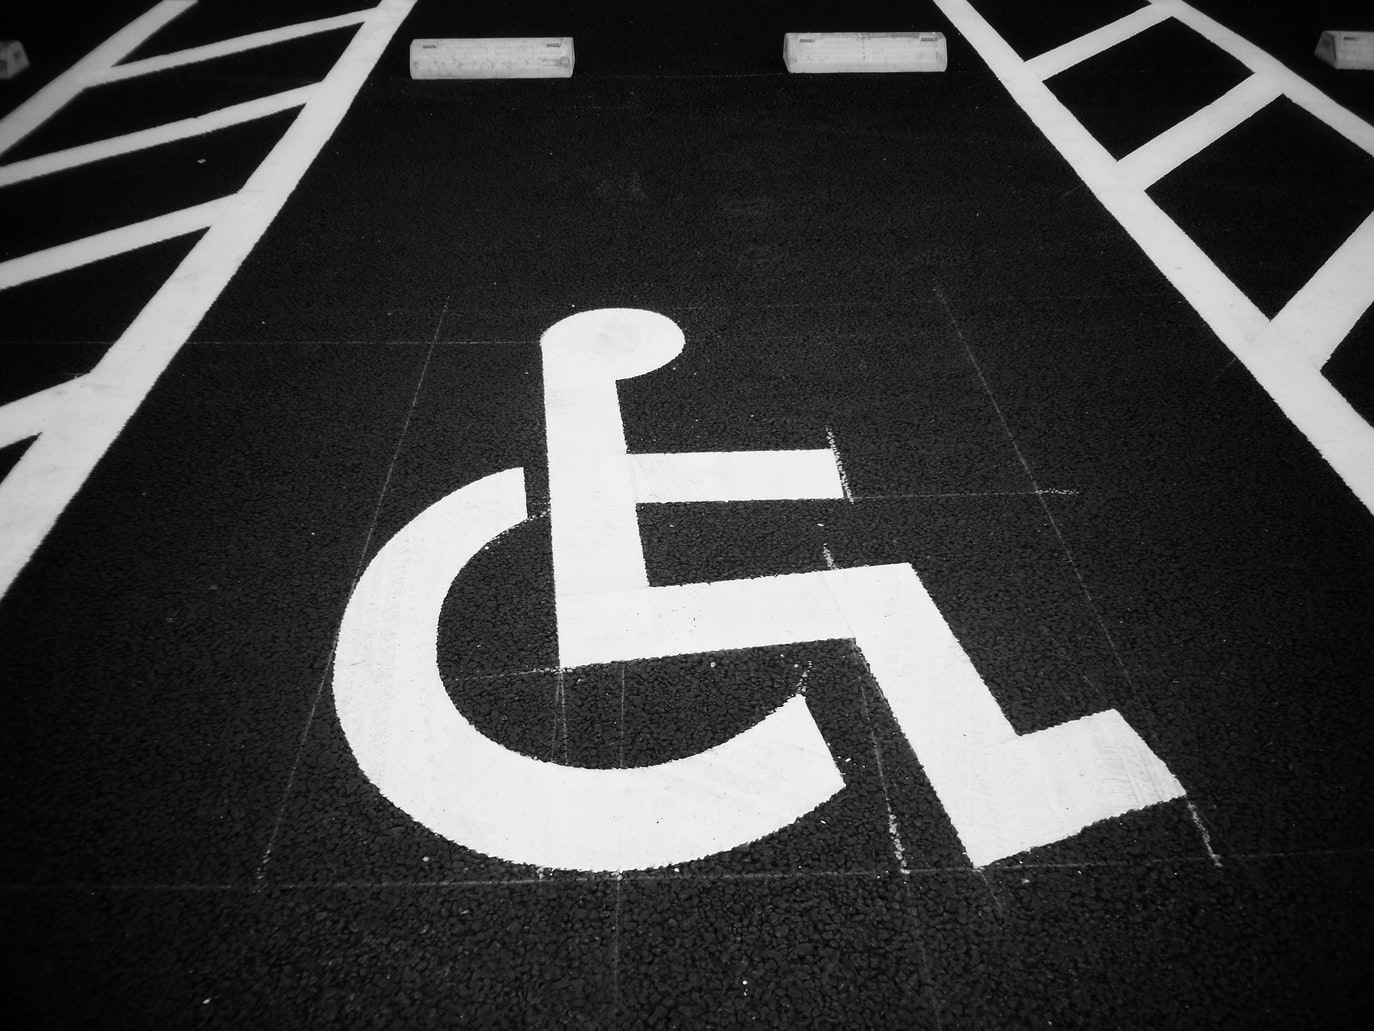 UK native authority implements IoT sensors to support disabled drivers park in South London